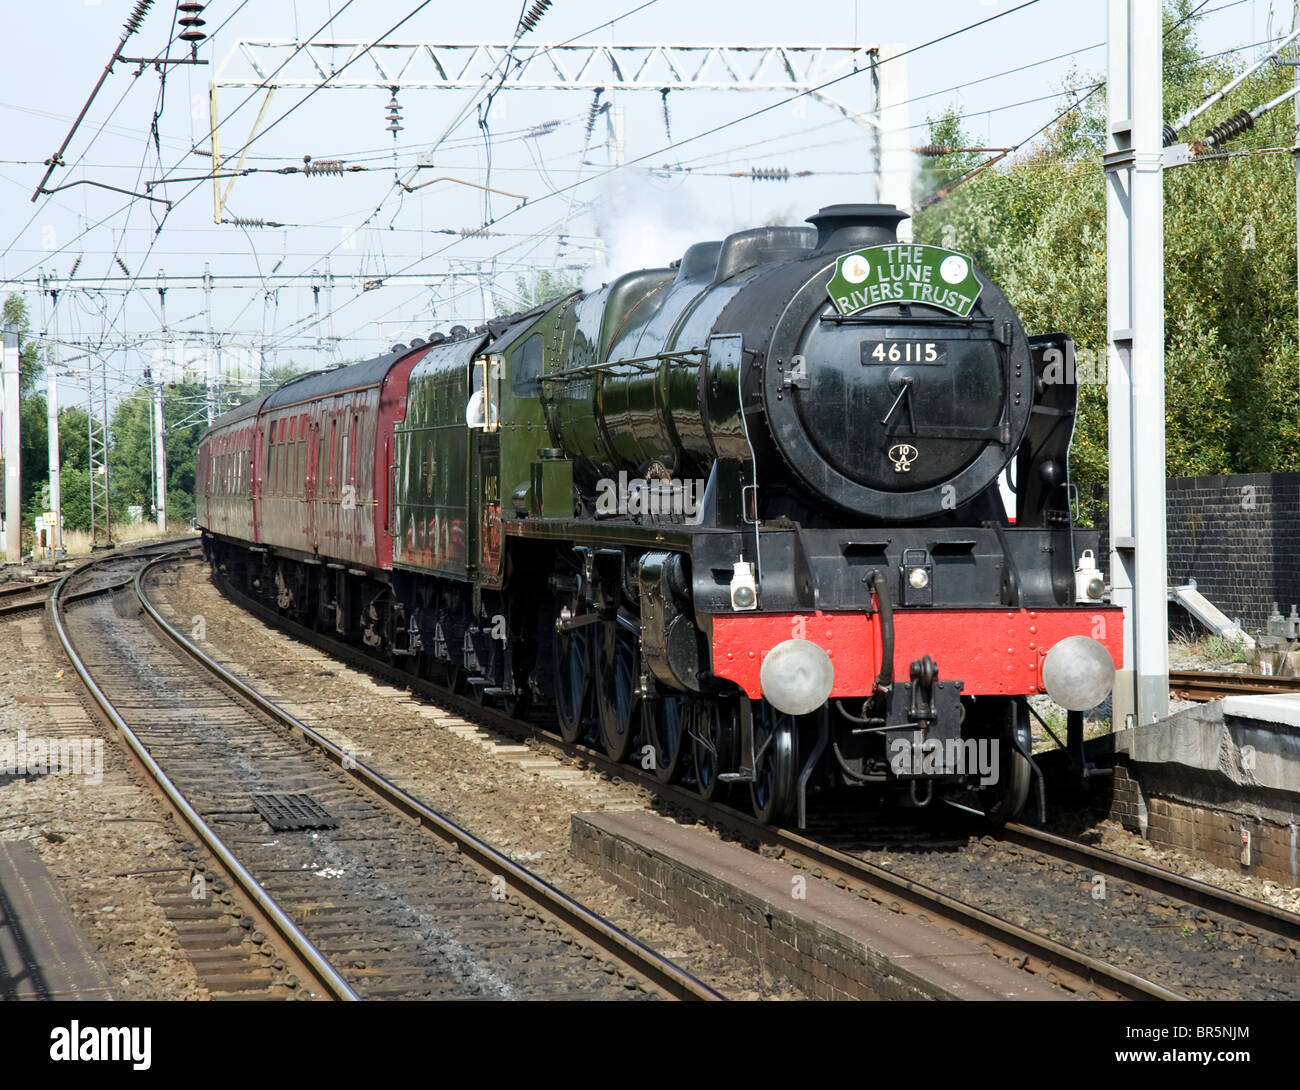 The 'Rebuilt Royal Scot' class locomotive, 'Scots Guardsman' hauling a steam special between Carnforth and Lancaster to Chester. Stock Photo